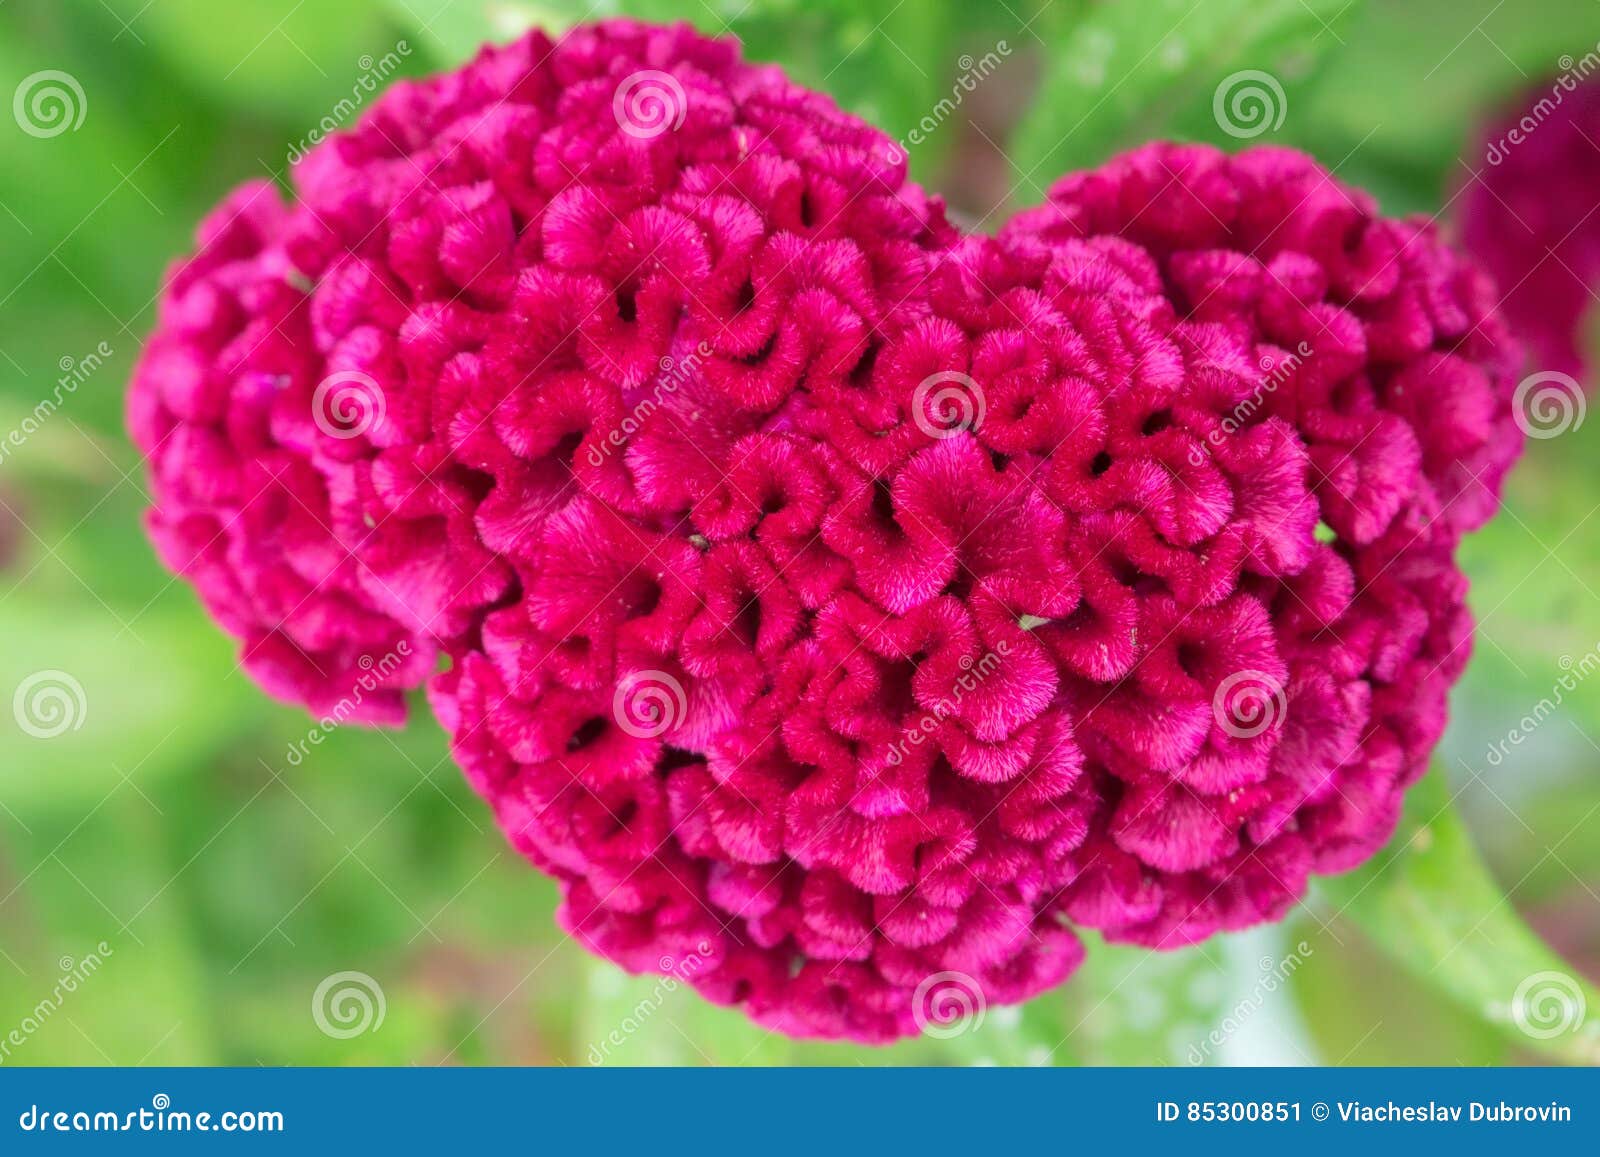 Tropical Flower Celosia Cristata In Garden Stock Image Image Of Flora Blooming 85300851